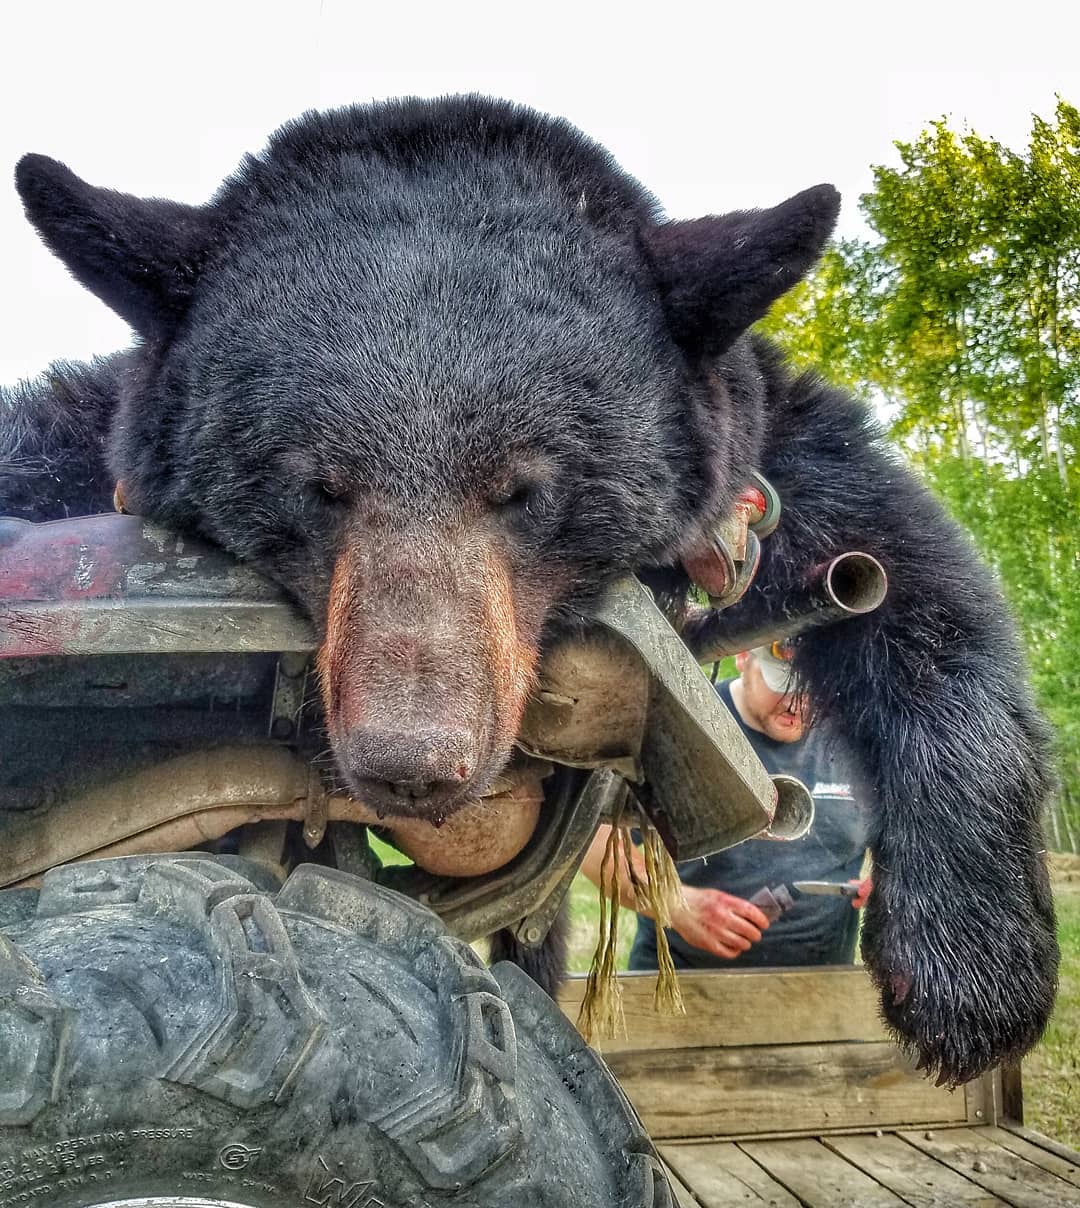 8 Great Cartridges for Bear Hunting